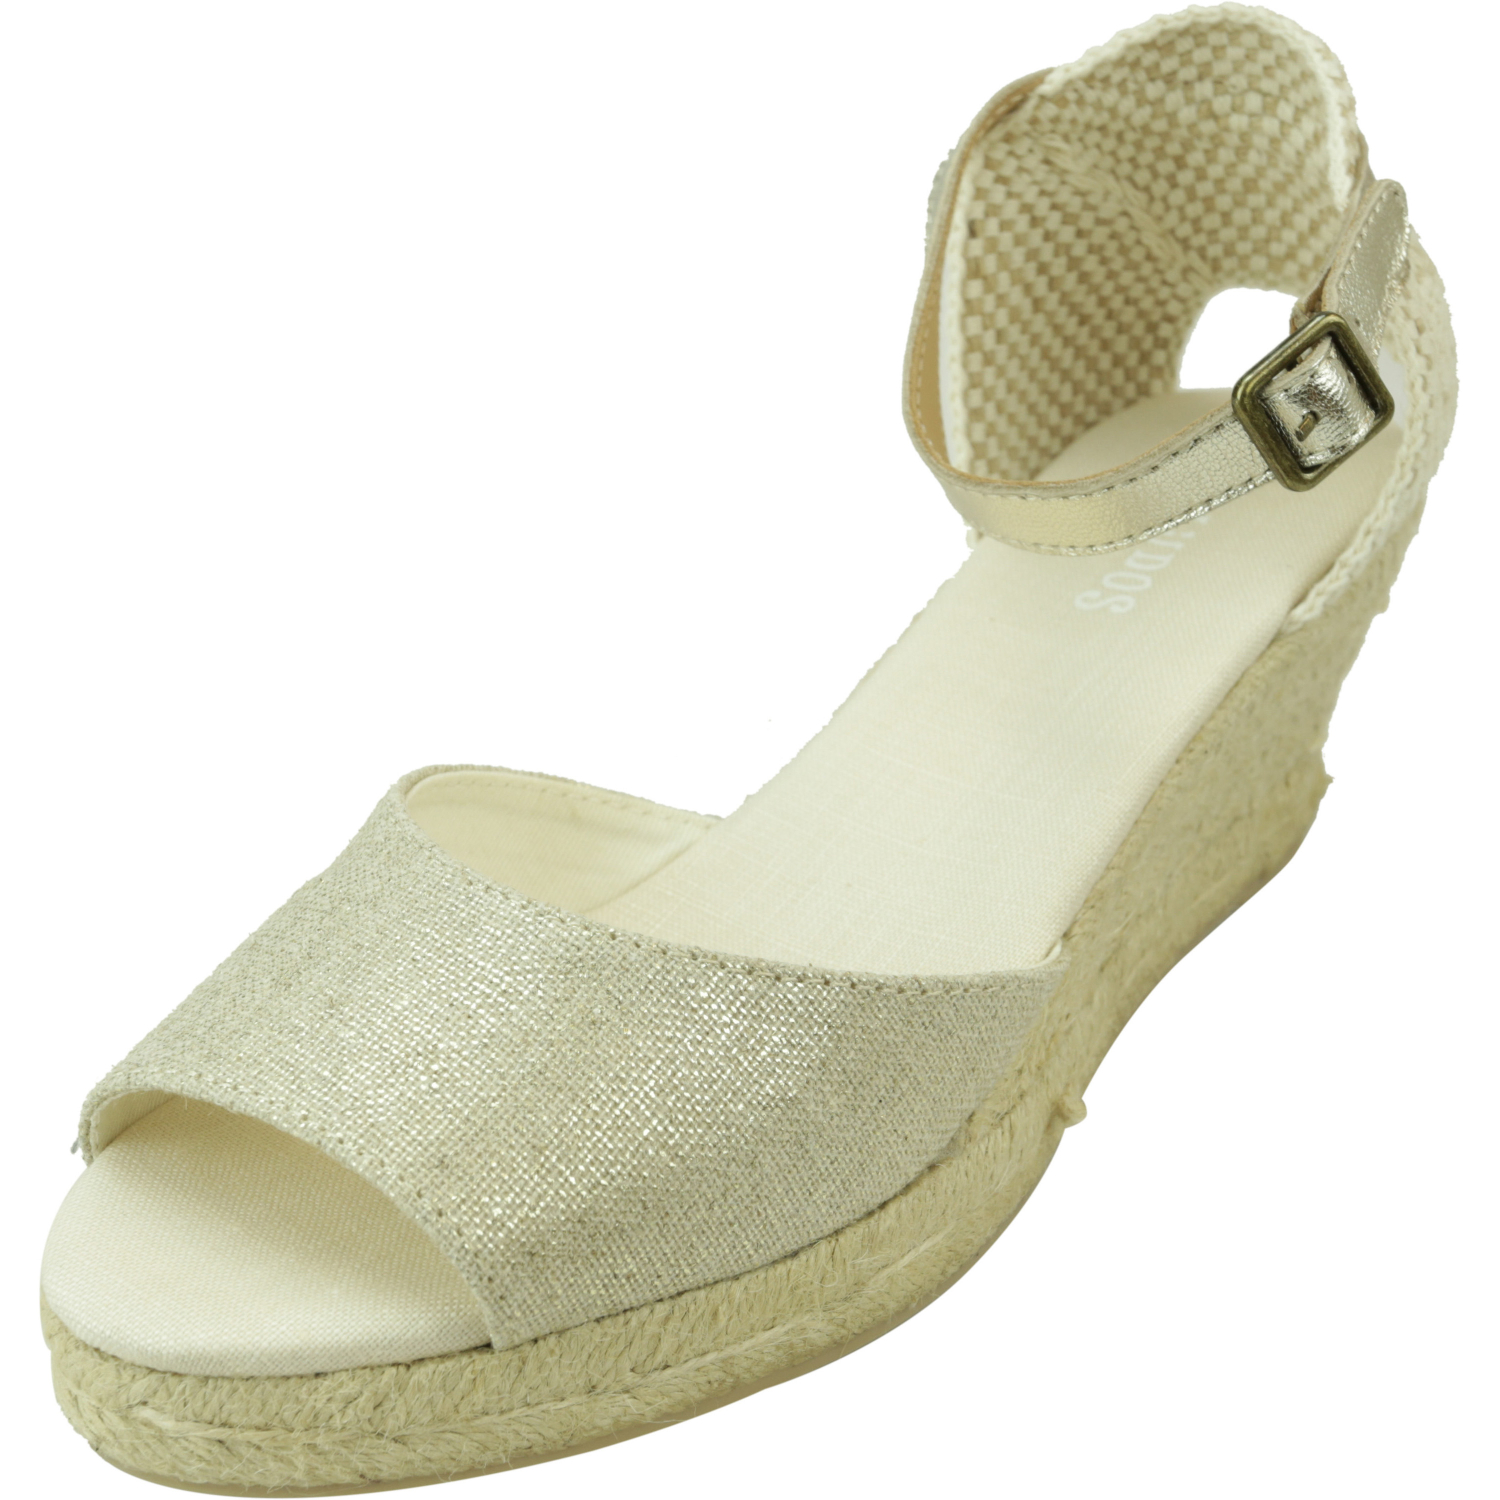 soludos closed toe mid wedge